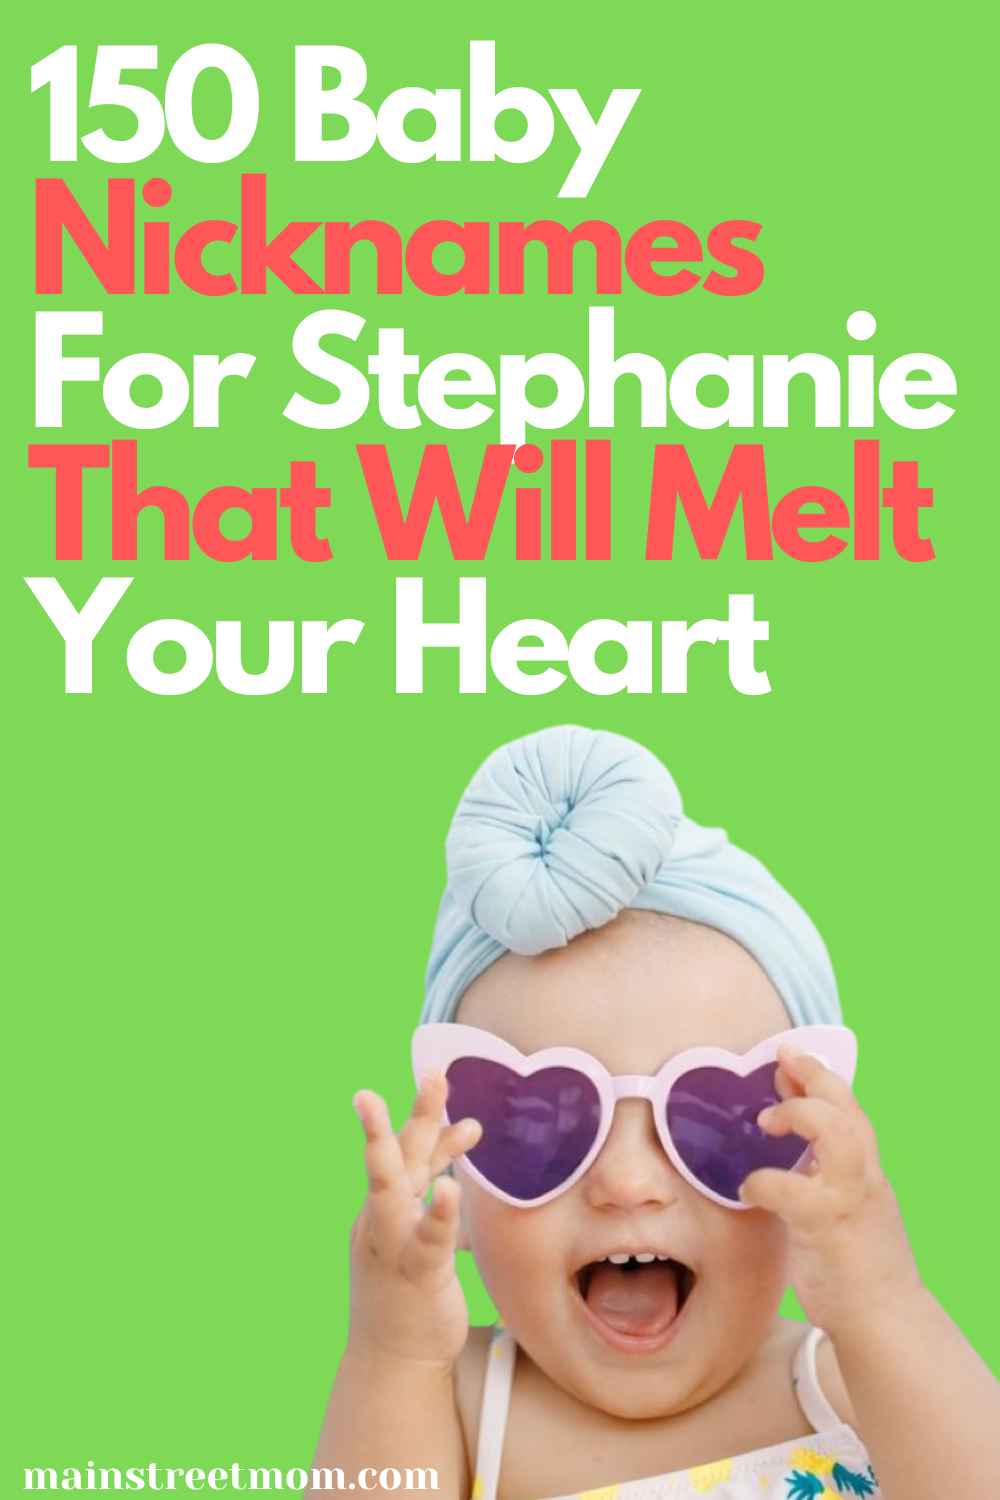 150 Baby Nicknames For Stephanie That Will Melt Your Heart